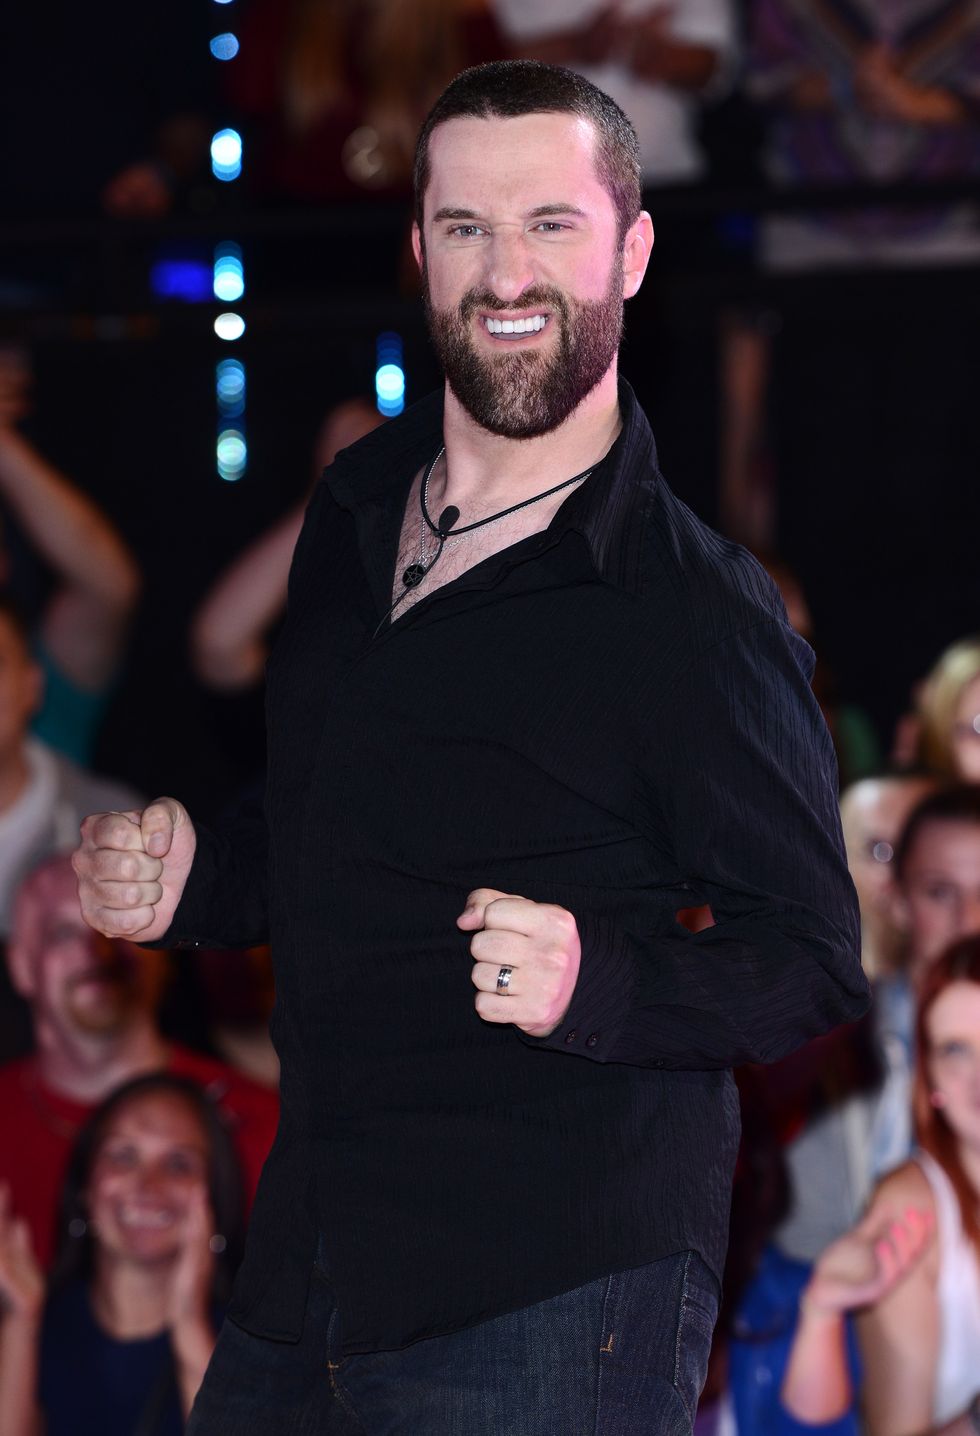 borehamwood, england   august 22  dustin diamond enters the celebrity big brother house at elstree studios on august 22, 2013 in borehamwood, england  photo by karwai tangwireimage